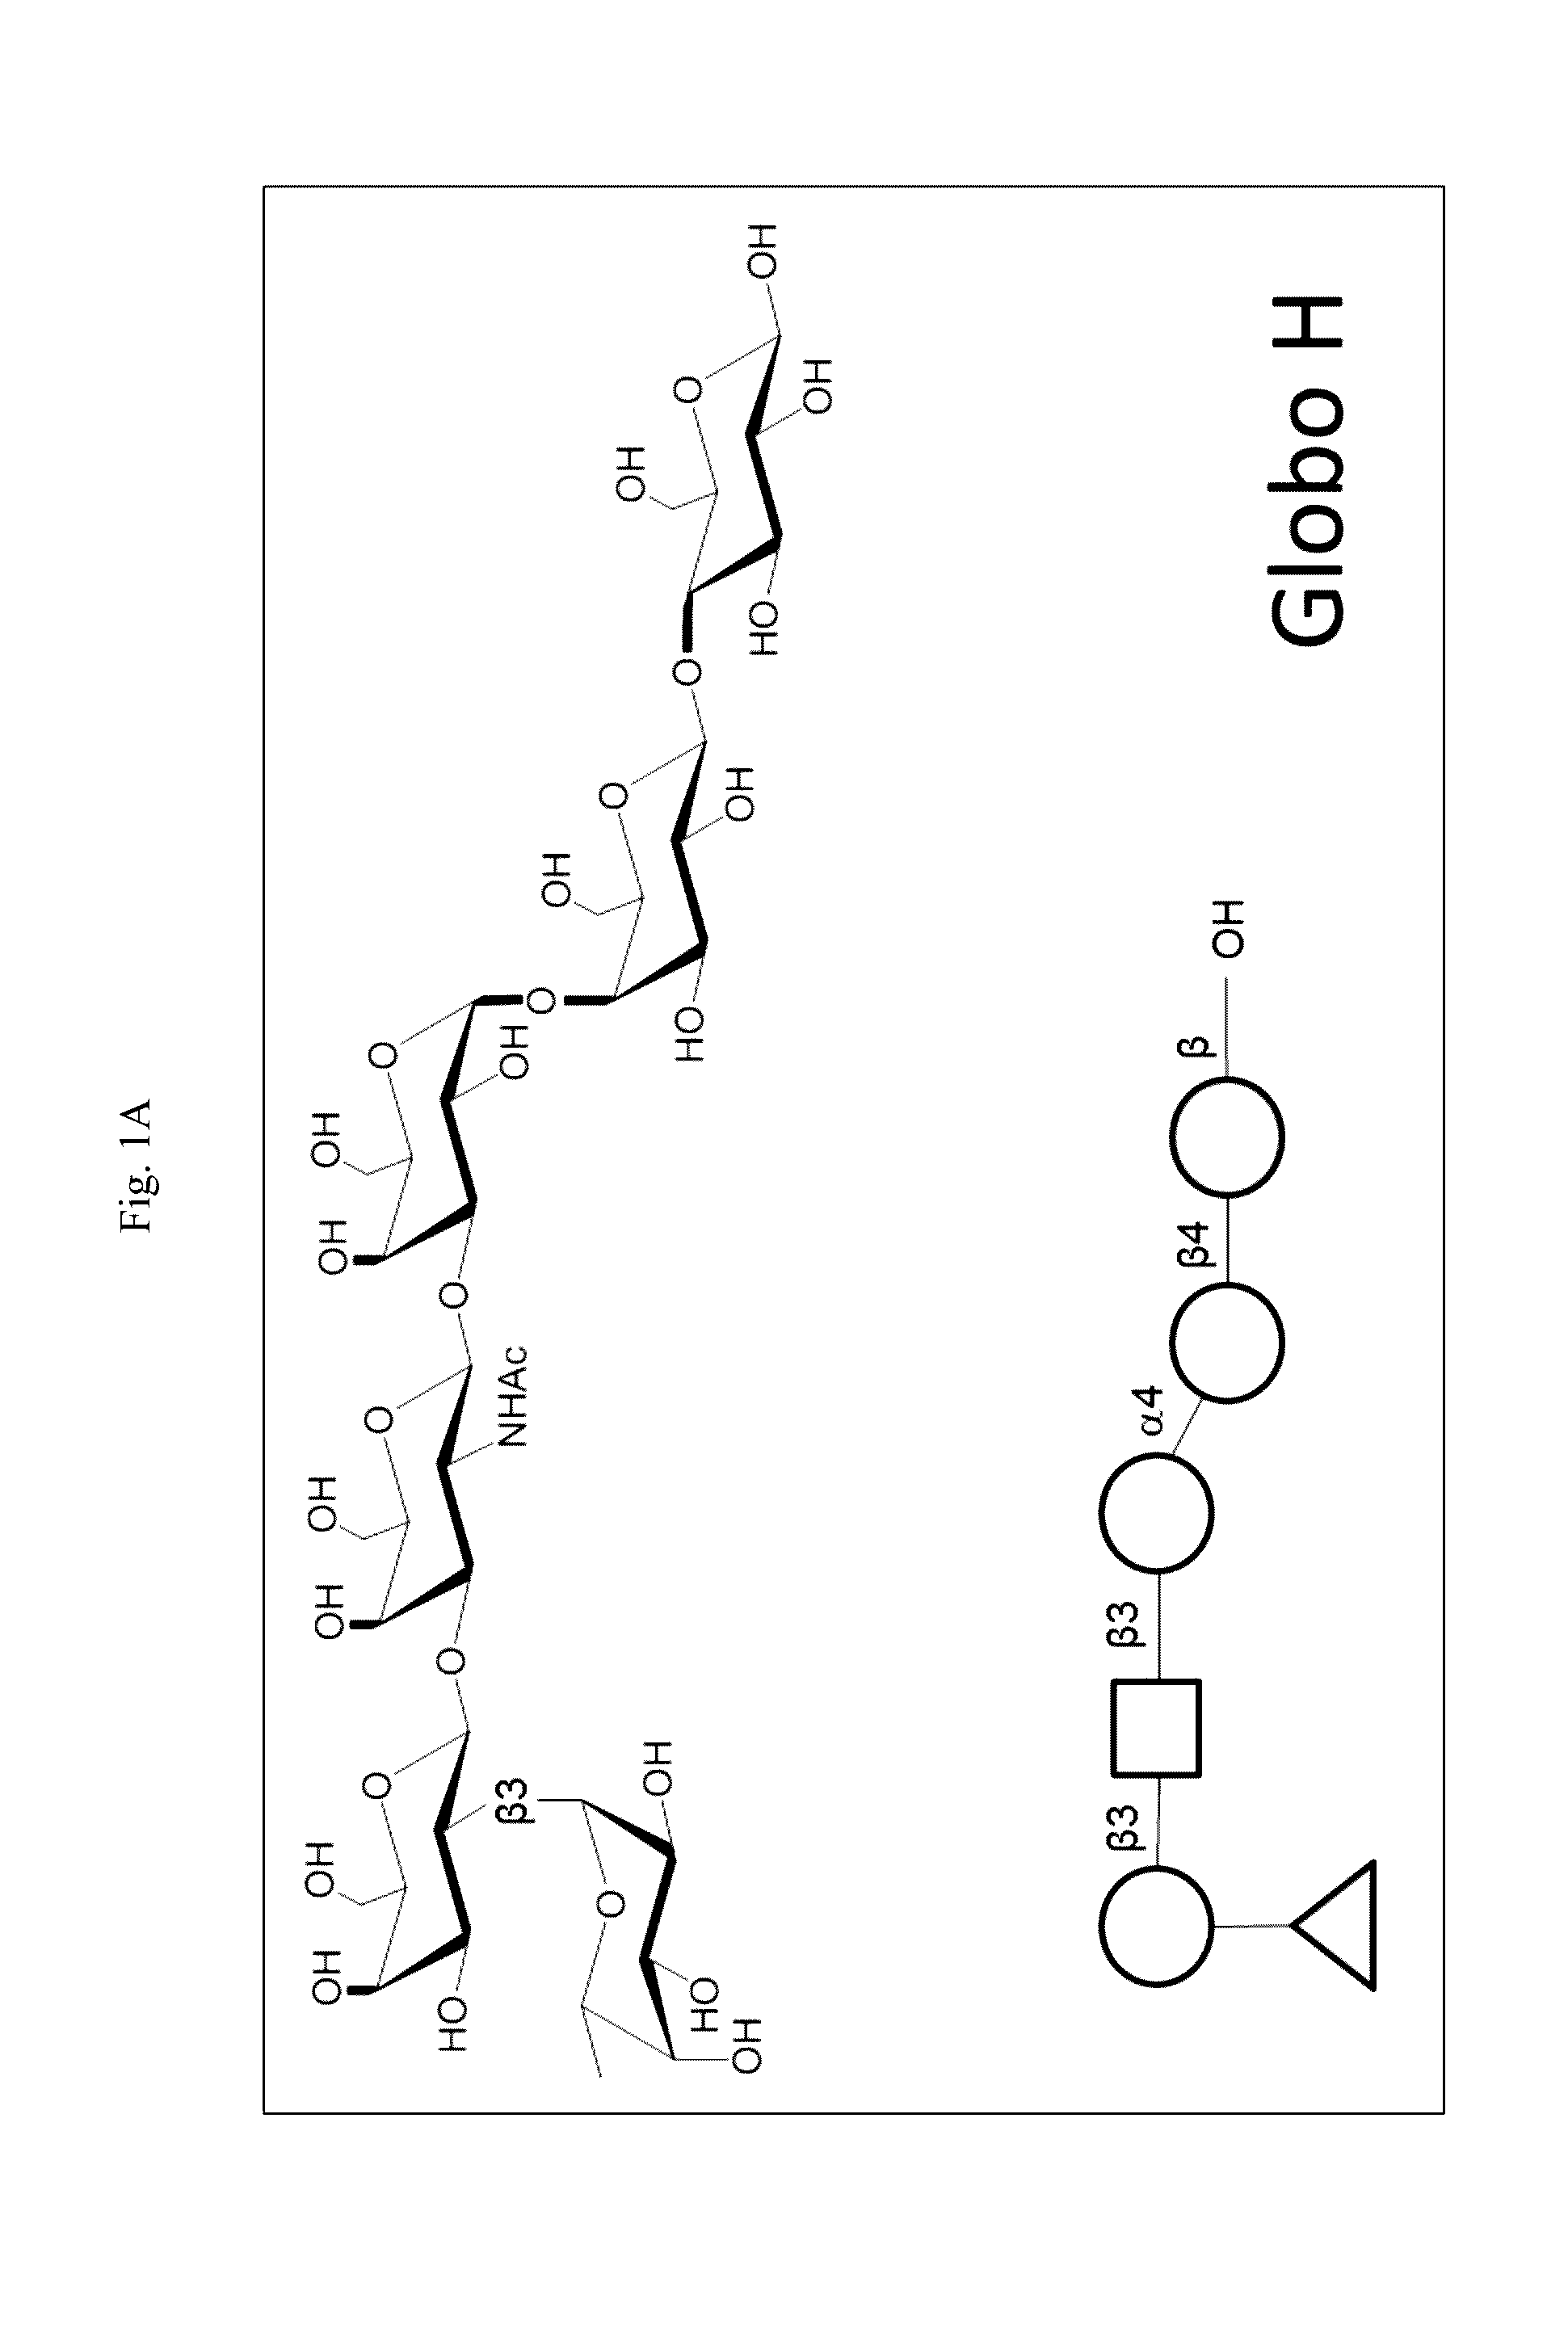 Immunogenic/therapeutic glycoconjugate compositions and uses thereof